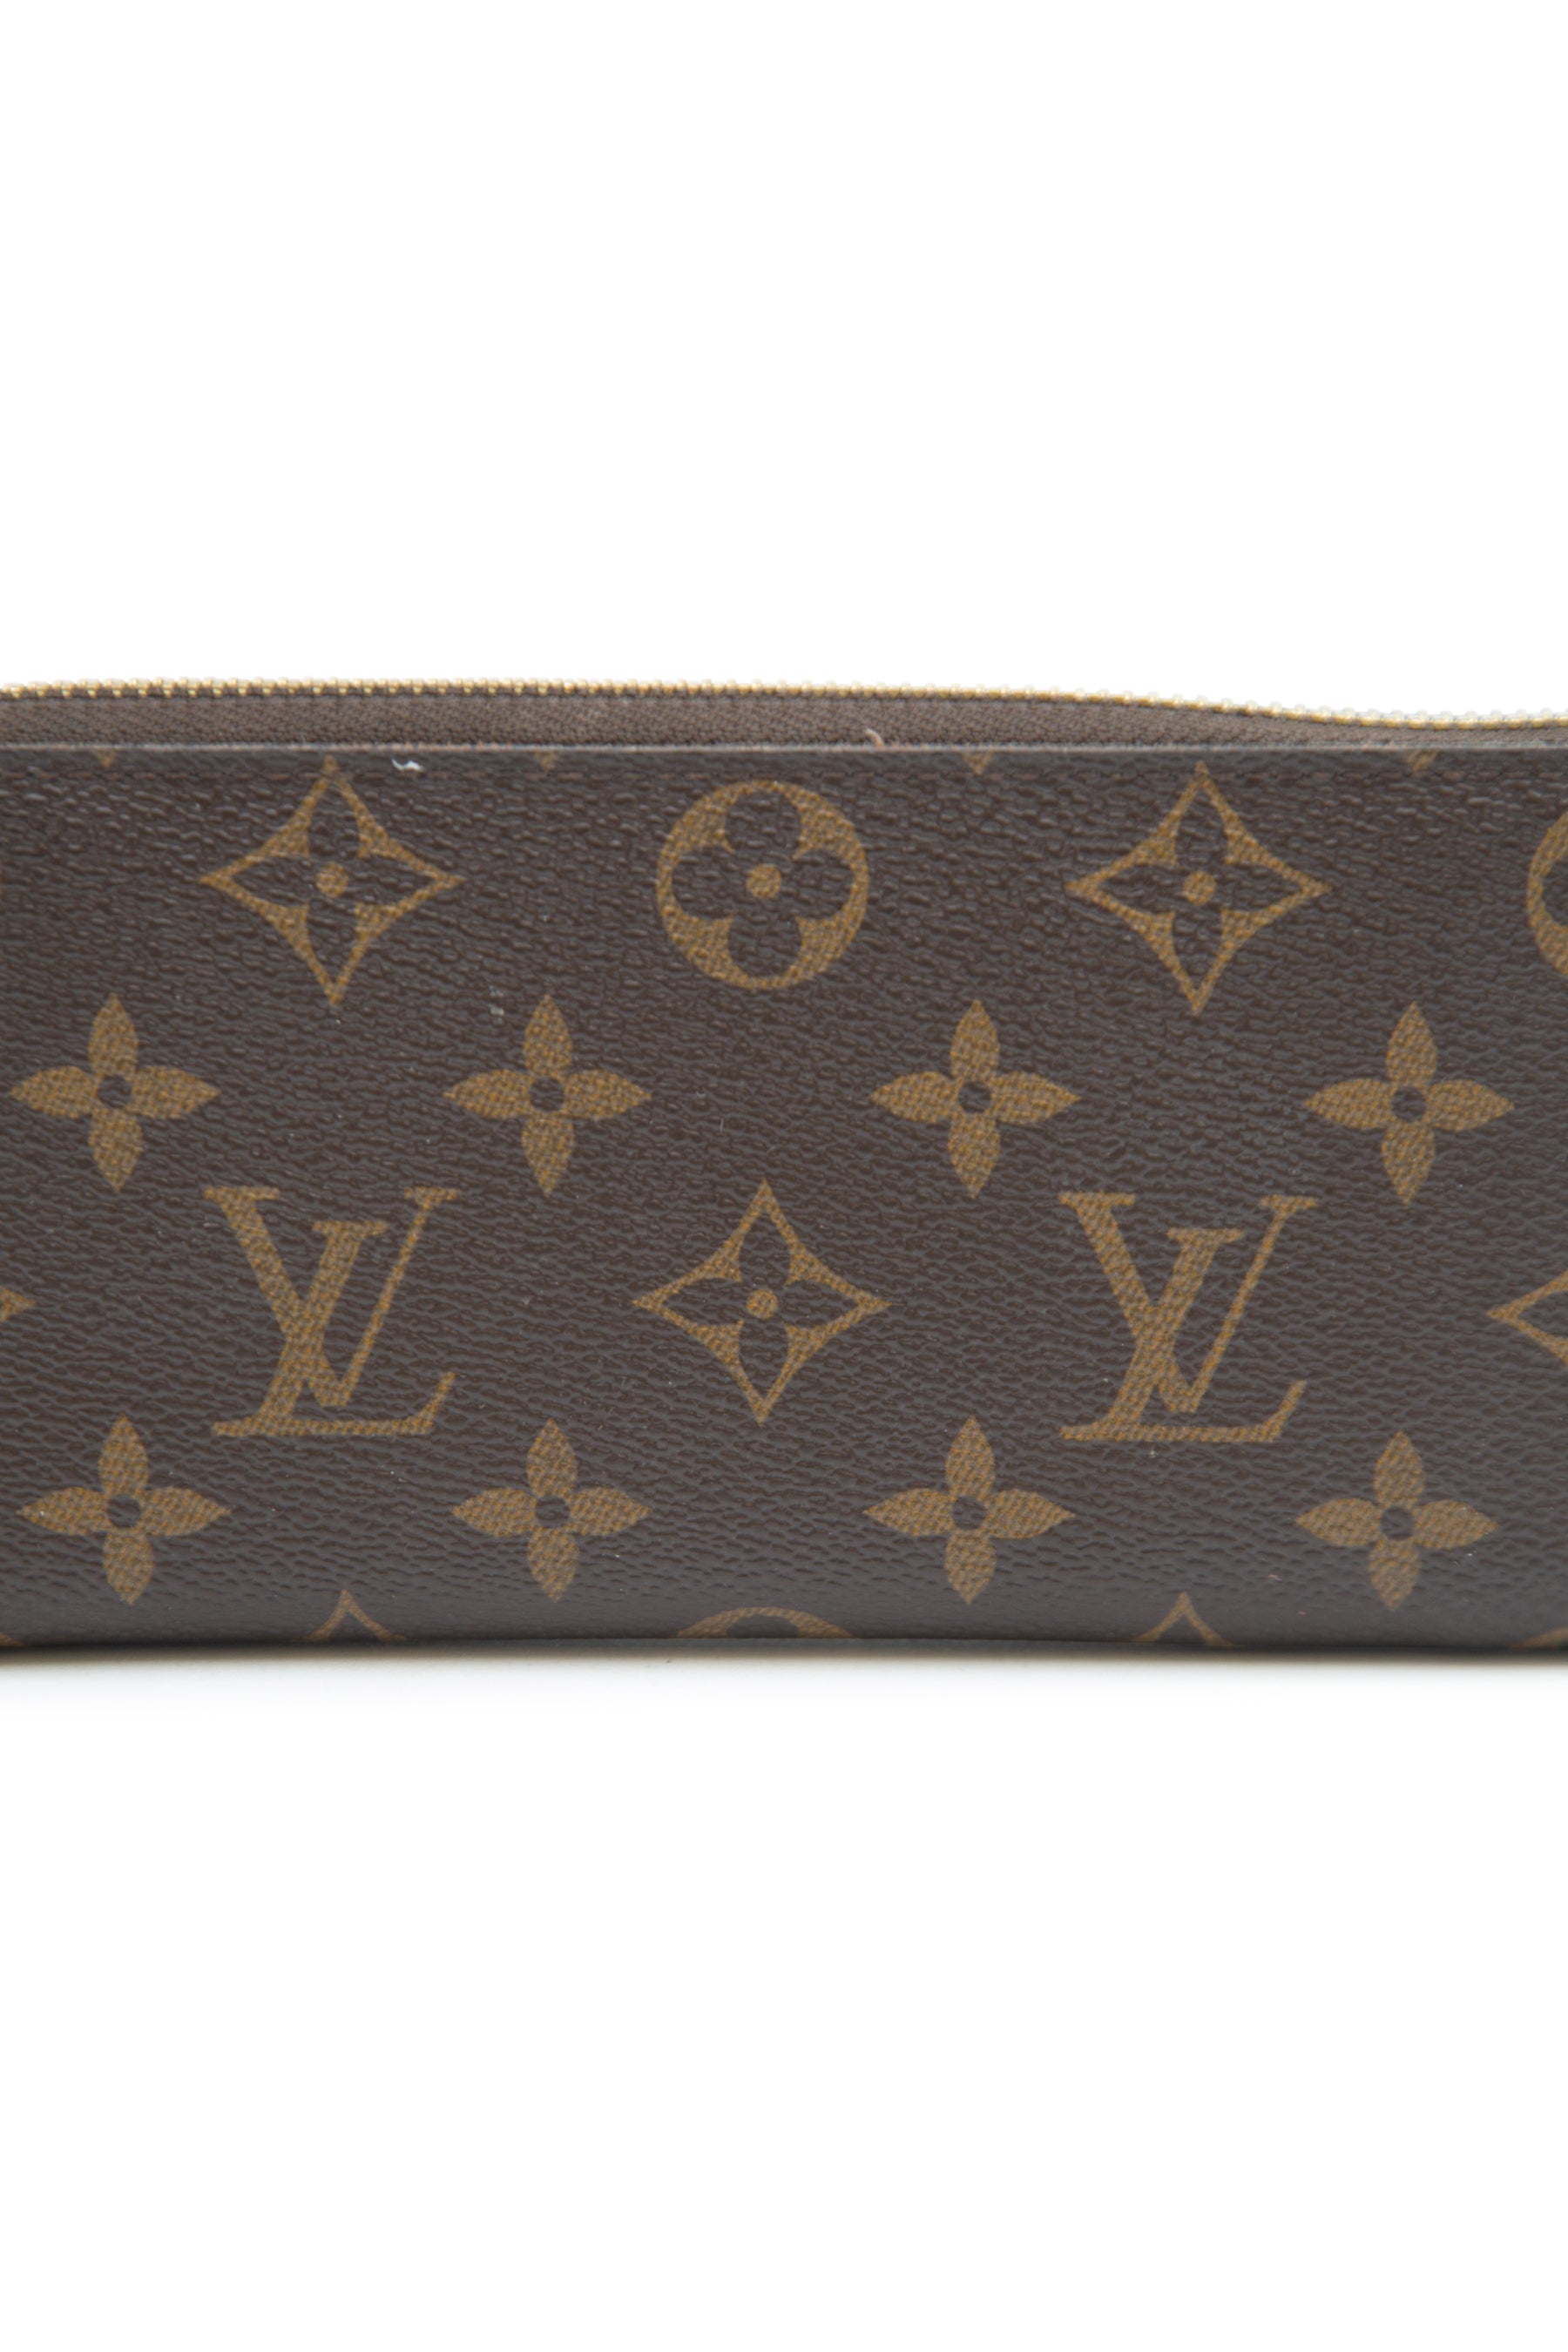 Louis Vuitton Women's Pre-Loved Clemence Wallet, Monogram, Brown, One Size